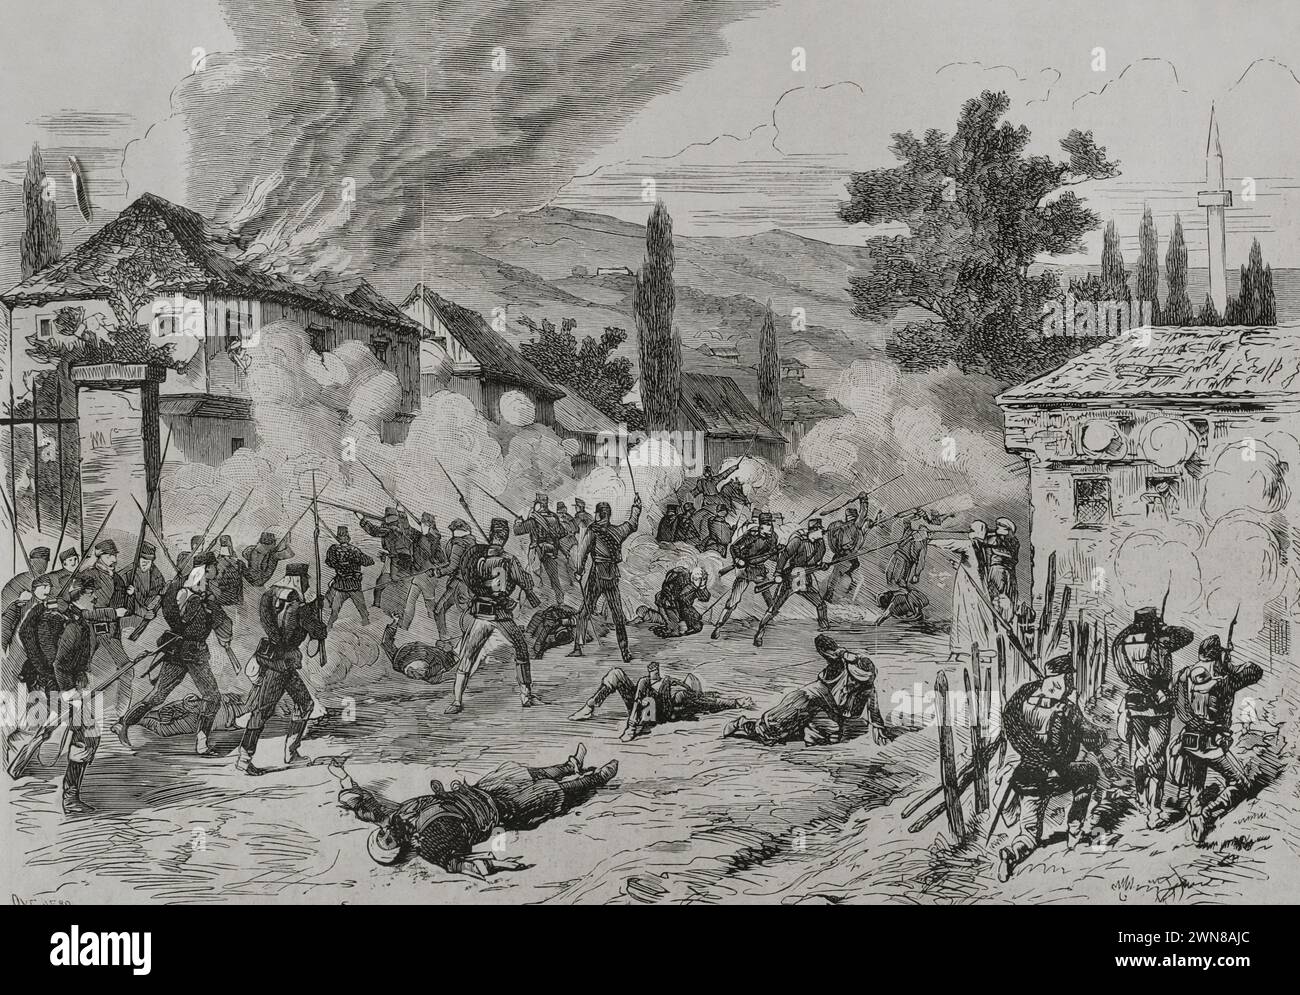 Austro-Hungarian campaign in Bosnia and Herzegovina (29 July to 20 October 1878). Bosnian uprising. Sarajevo, 19 August 1878. Street fighting between Austro-Hungarian troops and insurgents. Episode on the main street, where women and wounded insurgents also took part in the fighting. Engraving by Ovejero. La Ilustración Española y Americana (The Spanish and American Illustration), 1878. Stock Photo